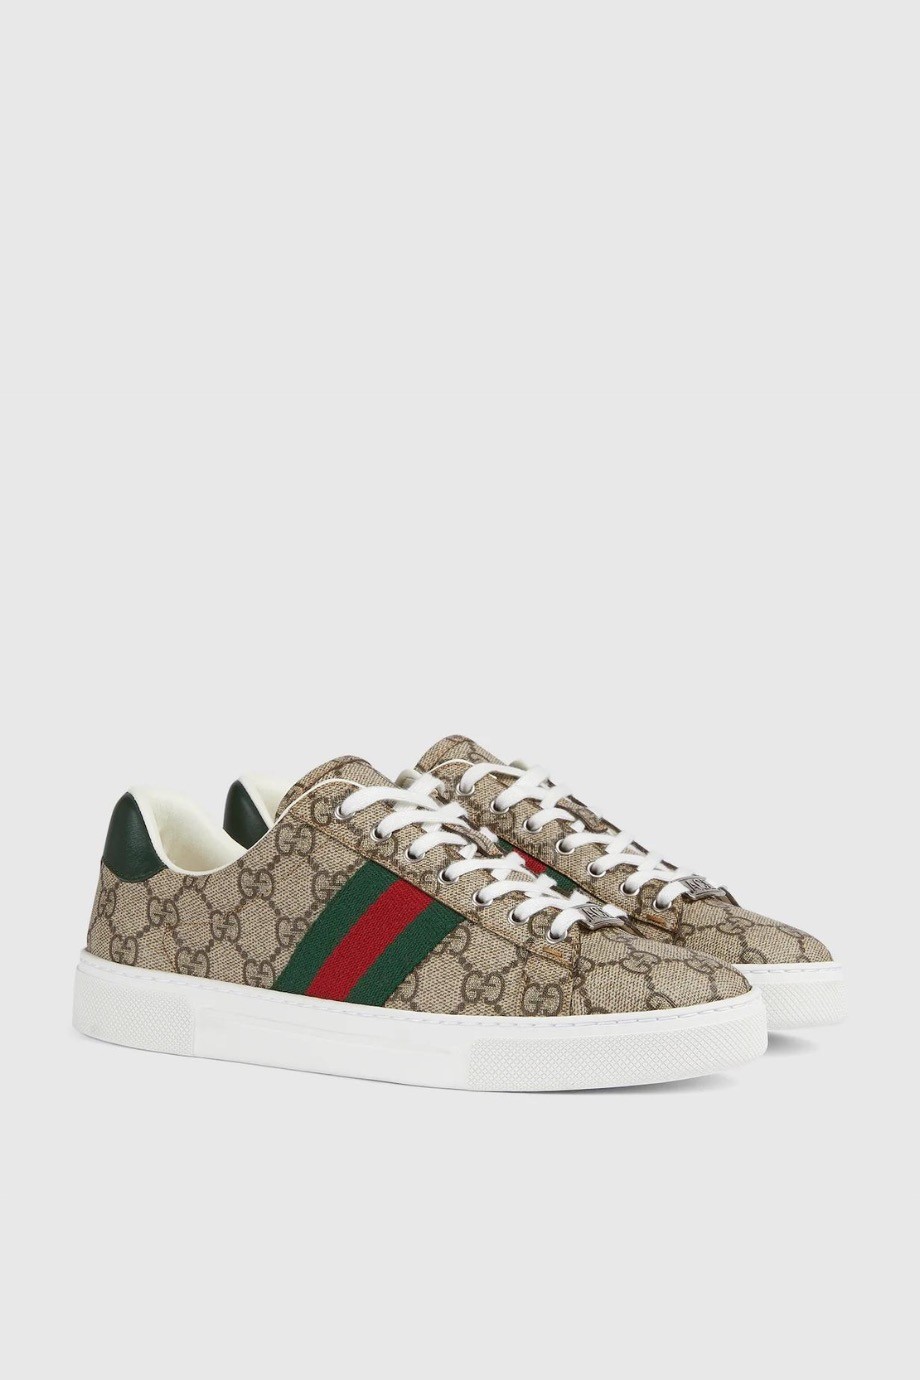 Gucci - Ace GG Supreme Leather Sneakers